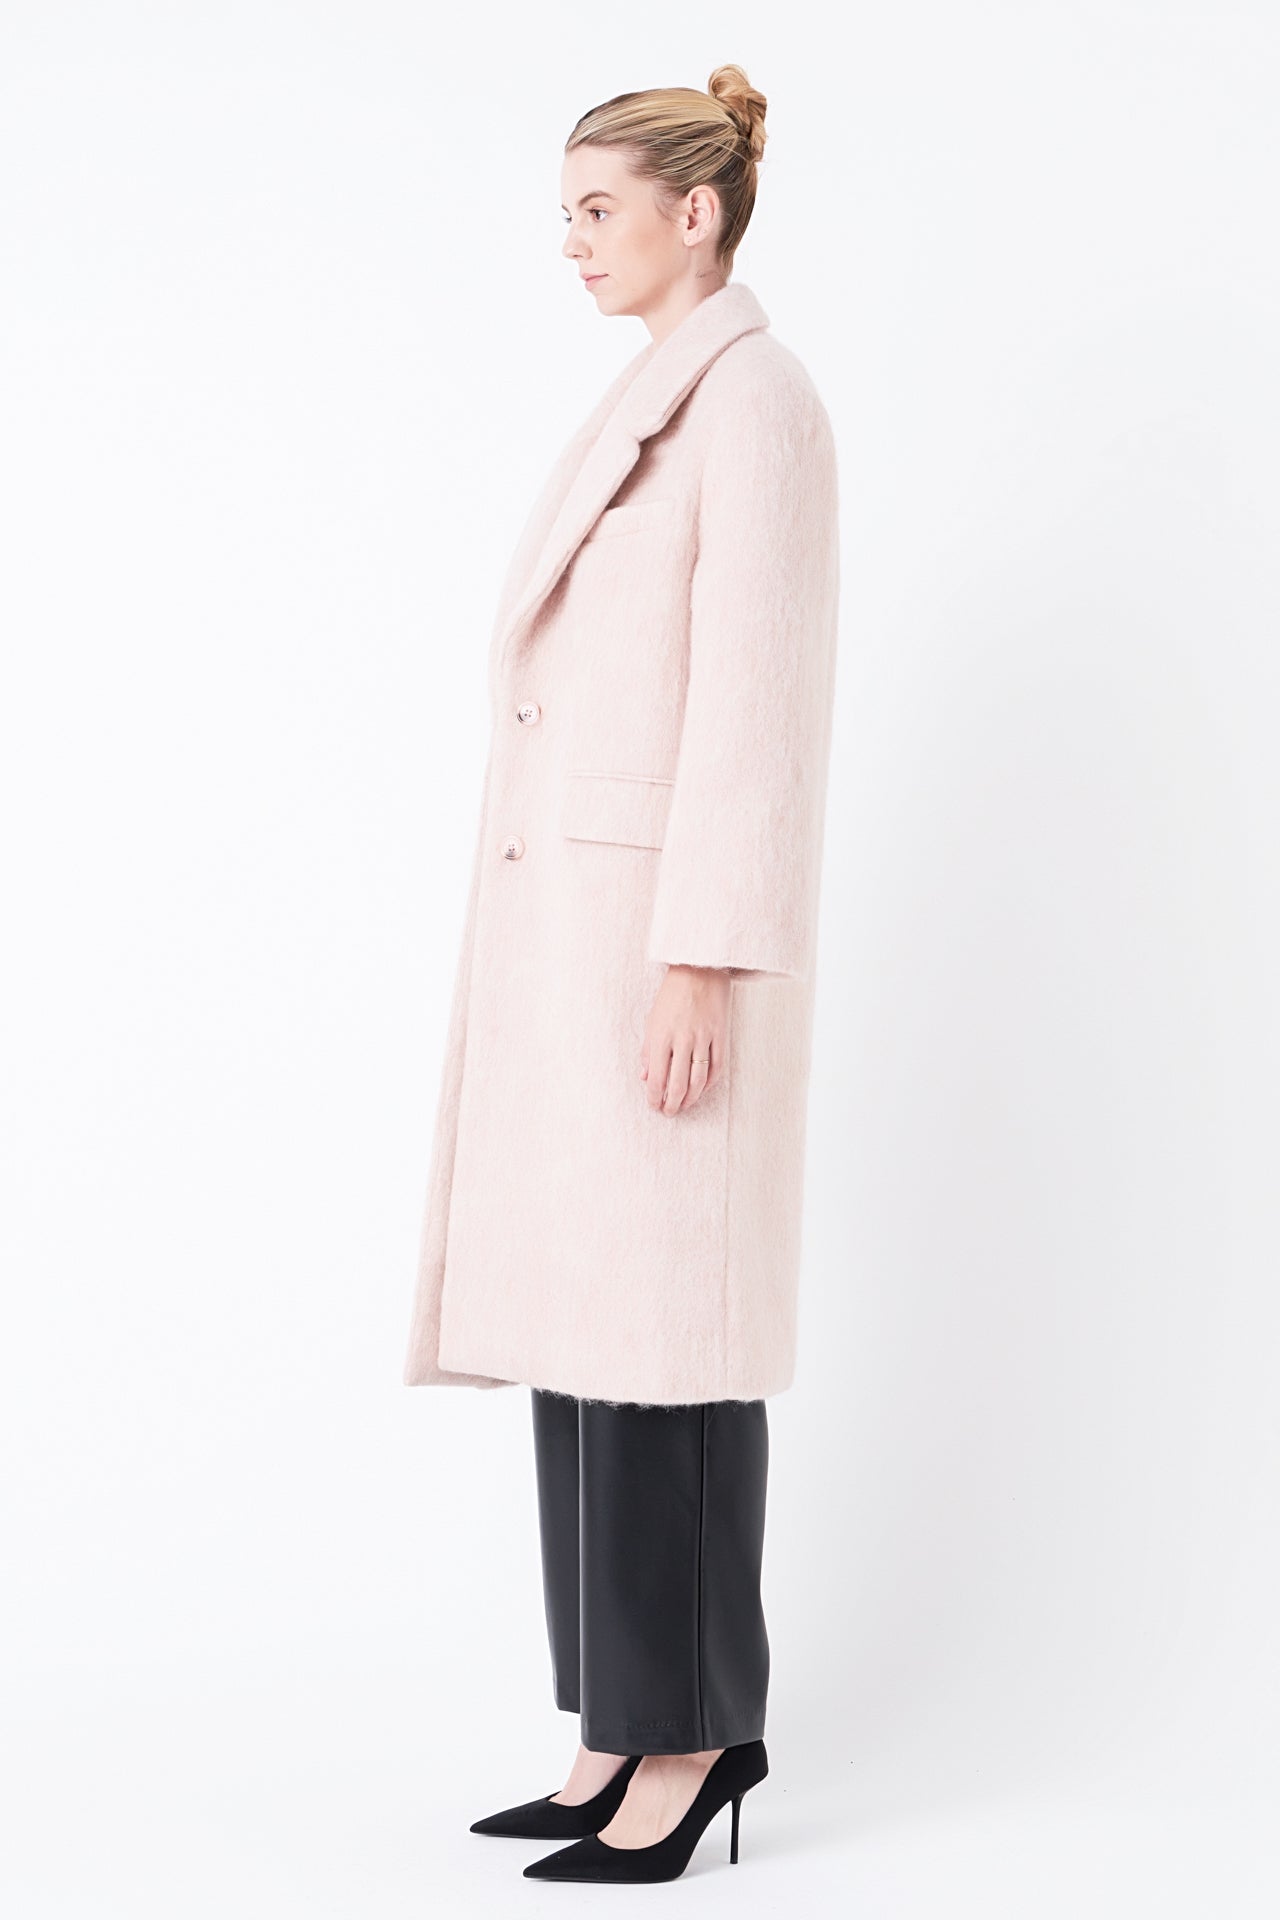 GREY LAB - Oversize Single-breasted Long Coat - COATS available at Objectrare